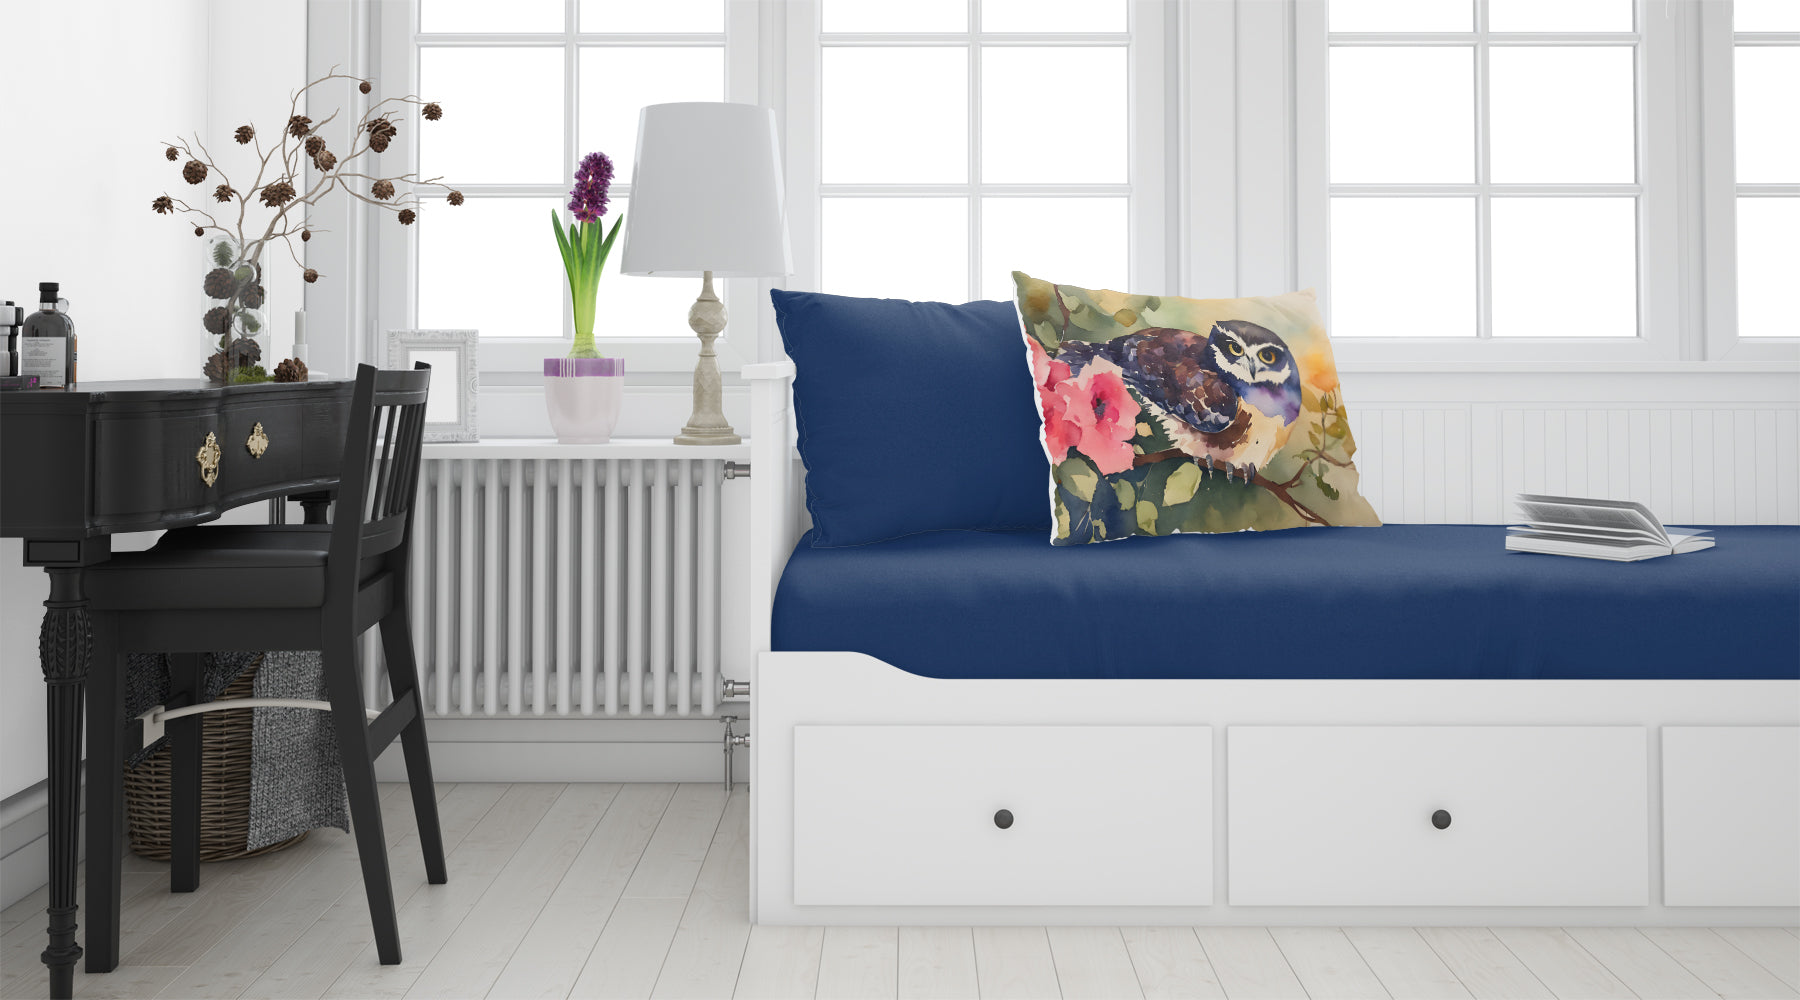 Buy this Spectacled Owl Standard Pillowcase